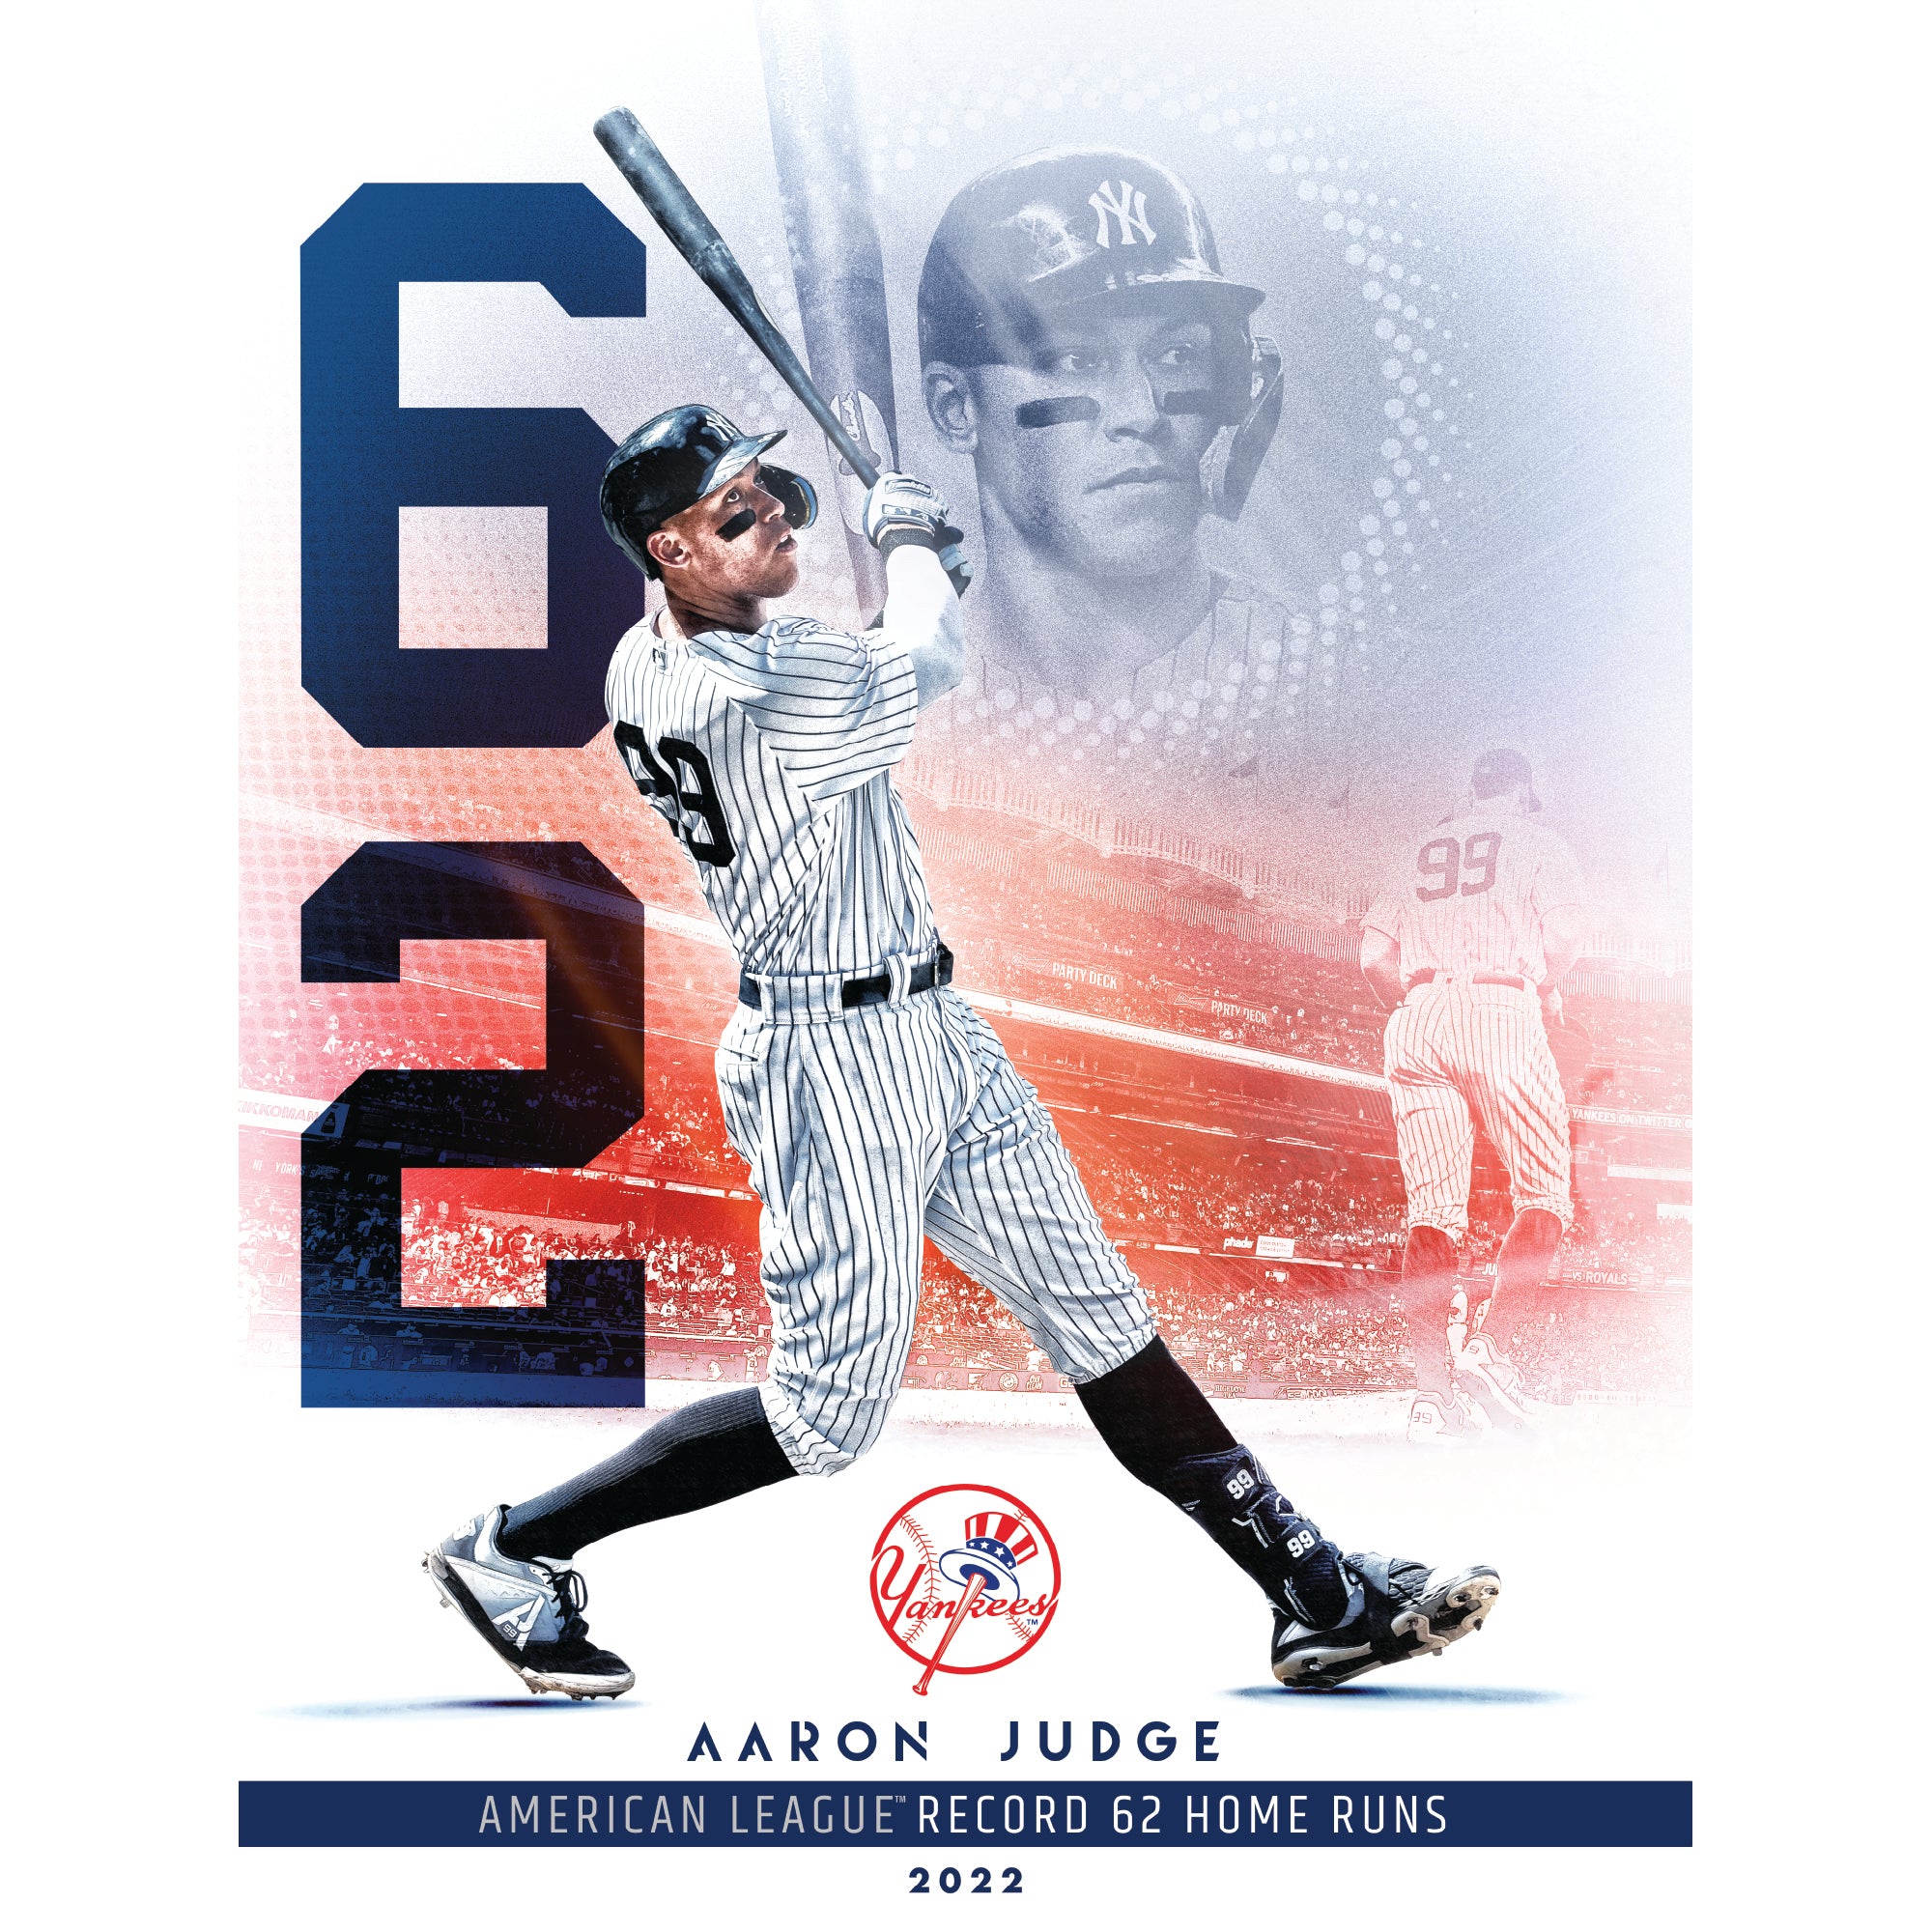 Aaron Judges historic 62nd home run in photos